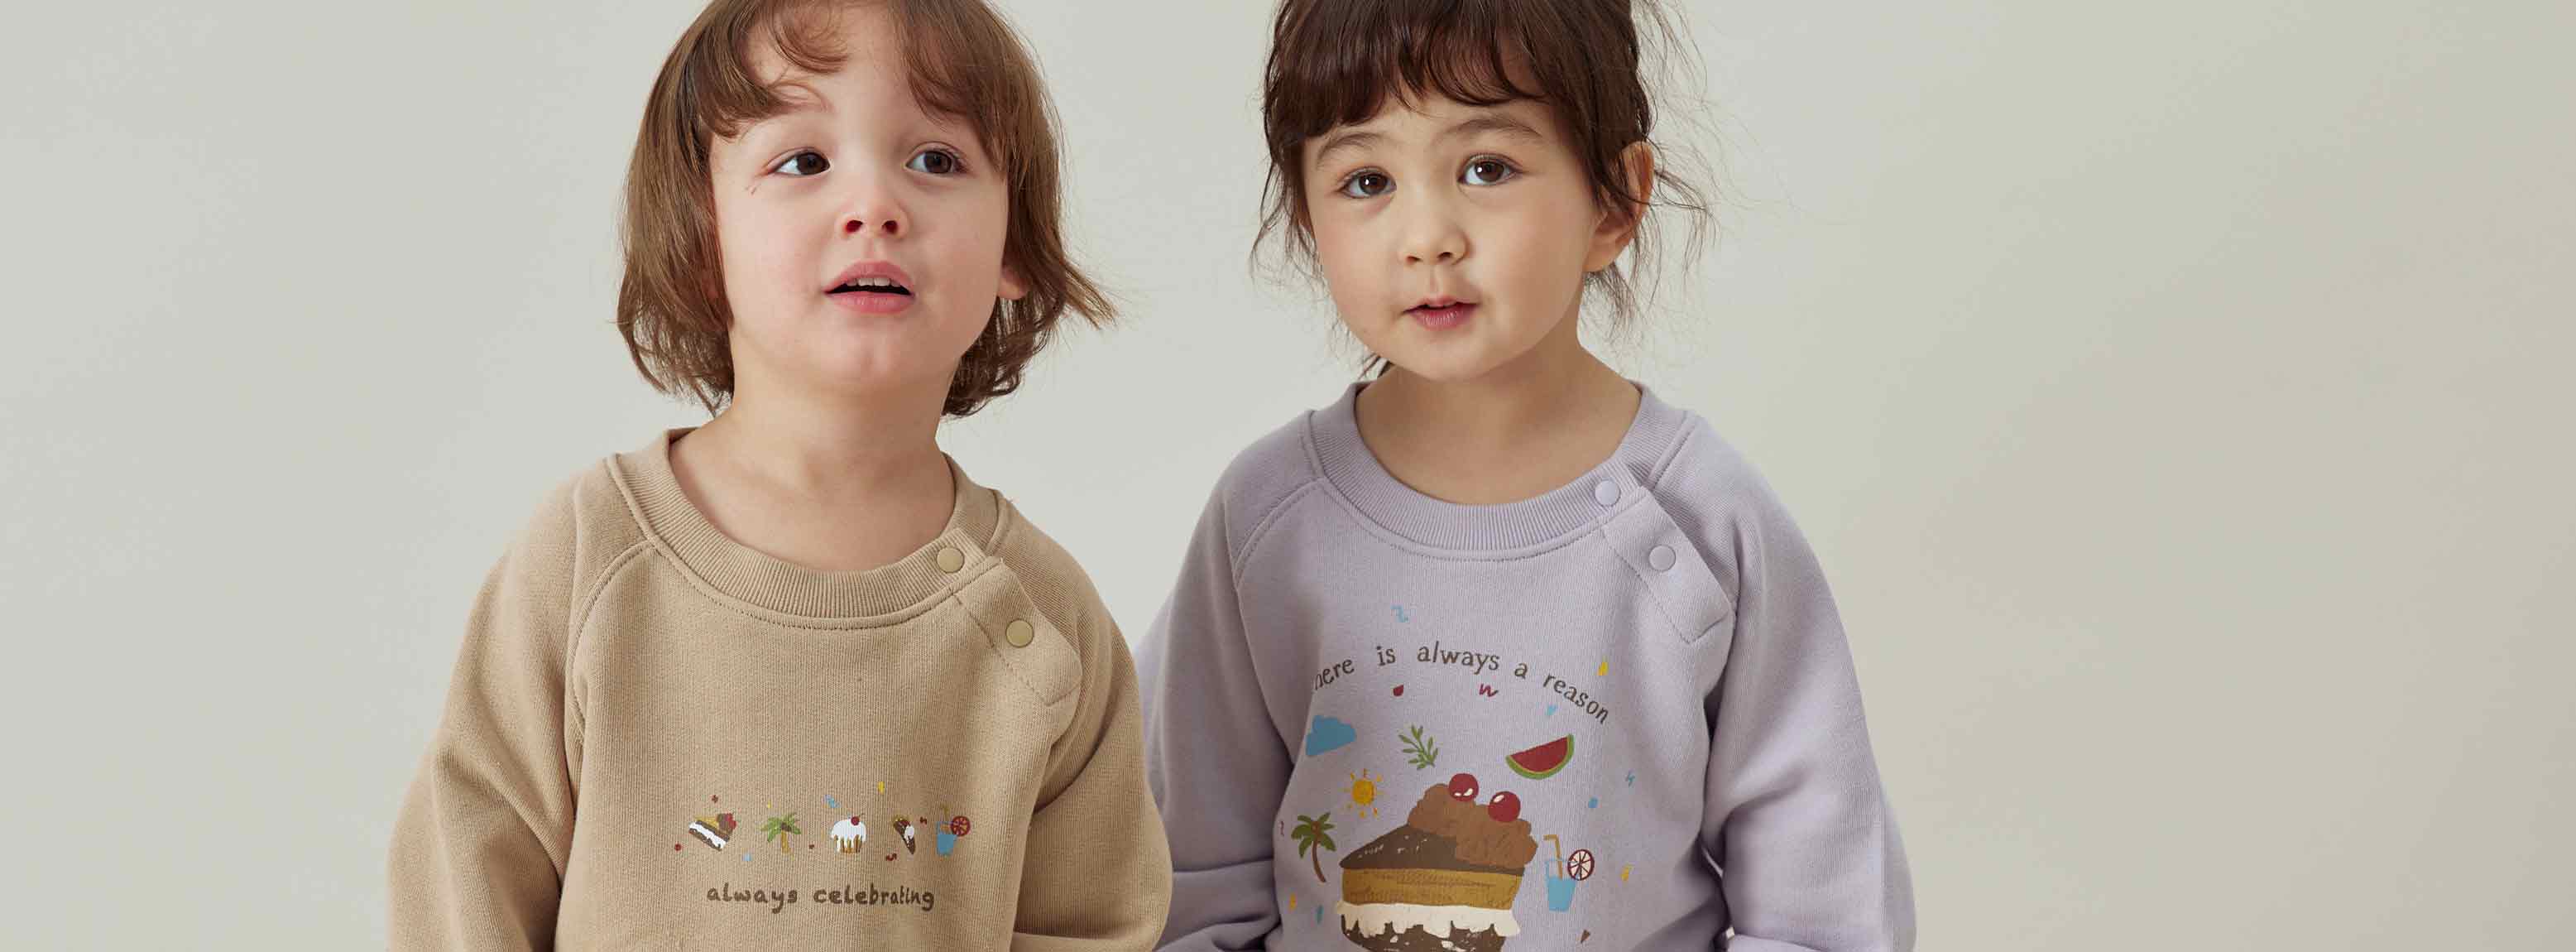 Timeless design, never go out of date. Providing your little one the best care. Norsu Organic